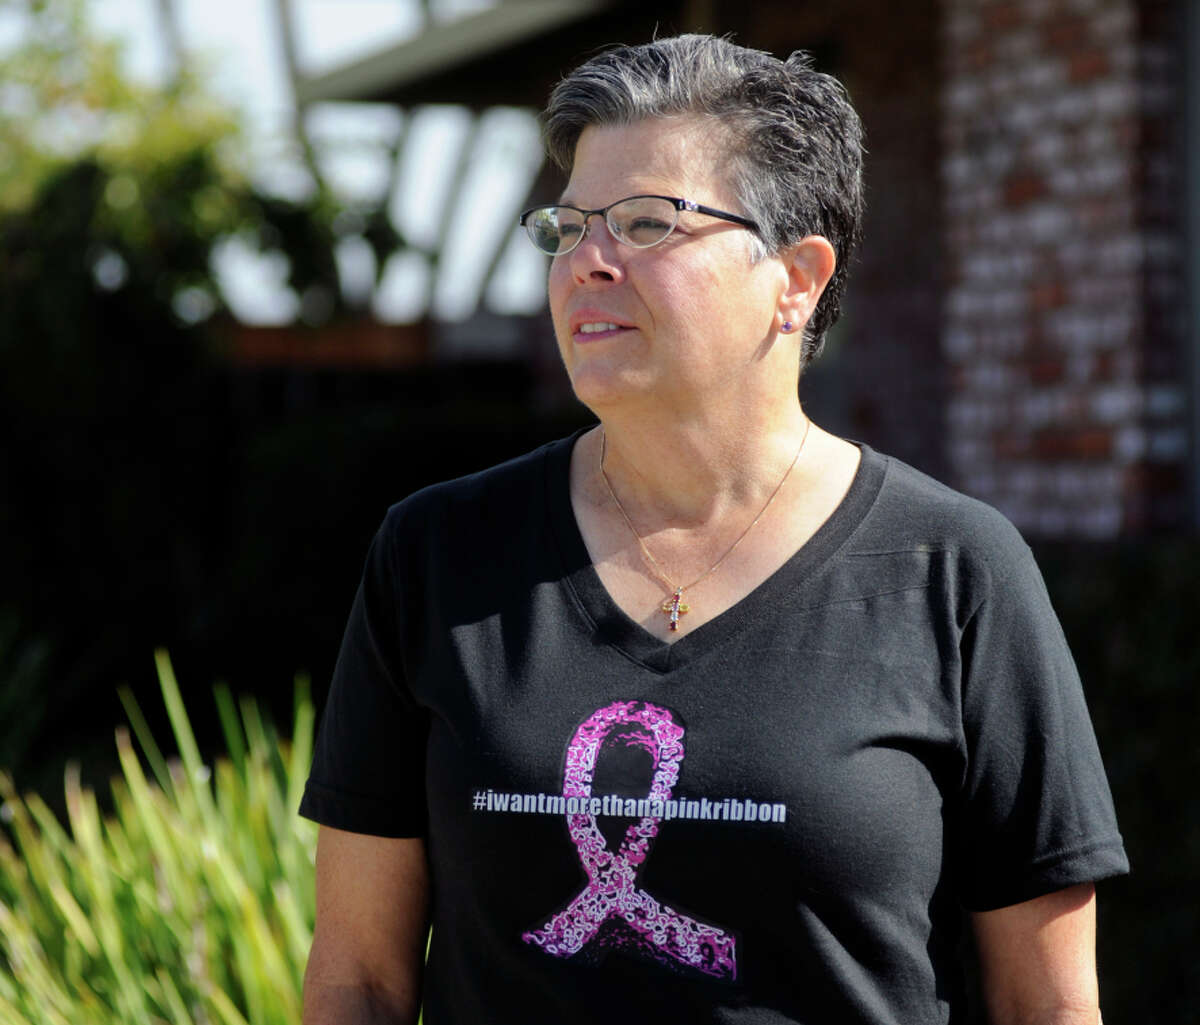 Vickie Young Wen, who has stage four cancer and is waging her own “I Want More Than a Pink Ribbon” campaign, poses for a portrait at her home in Sunnyvale.